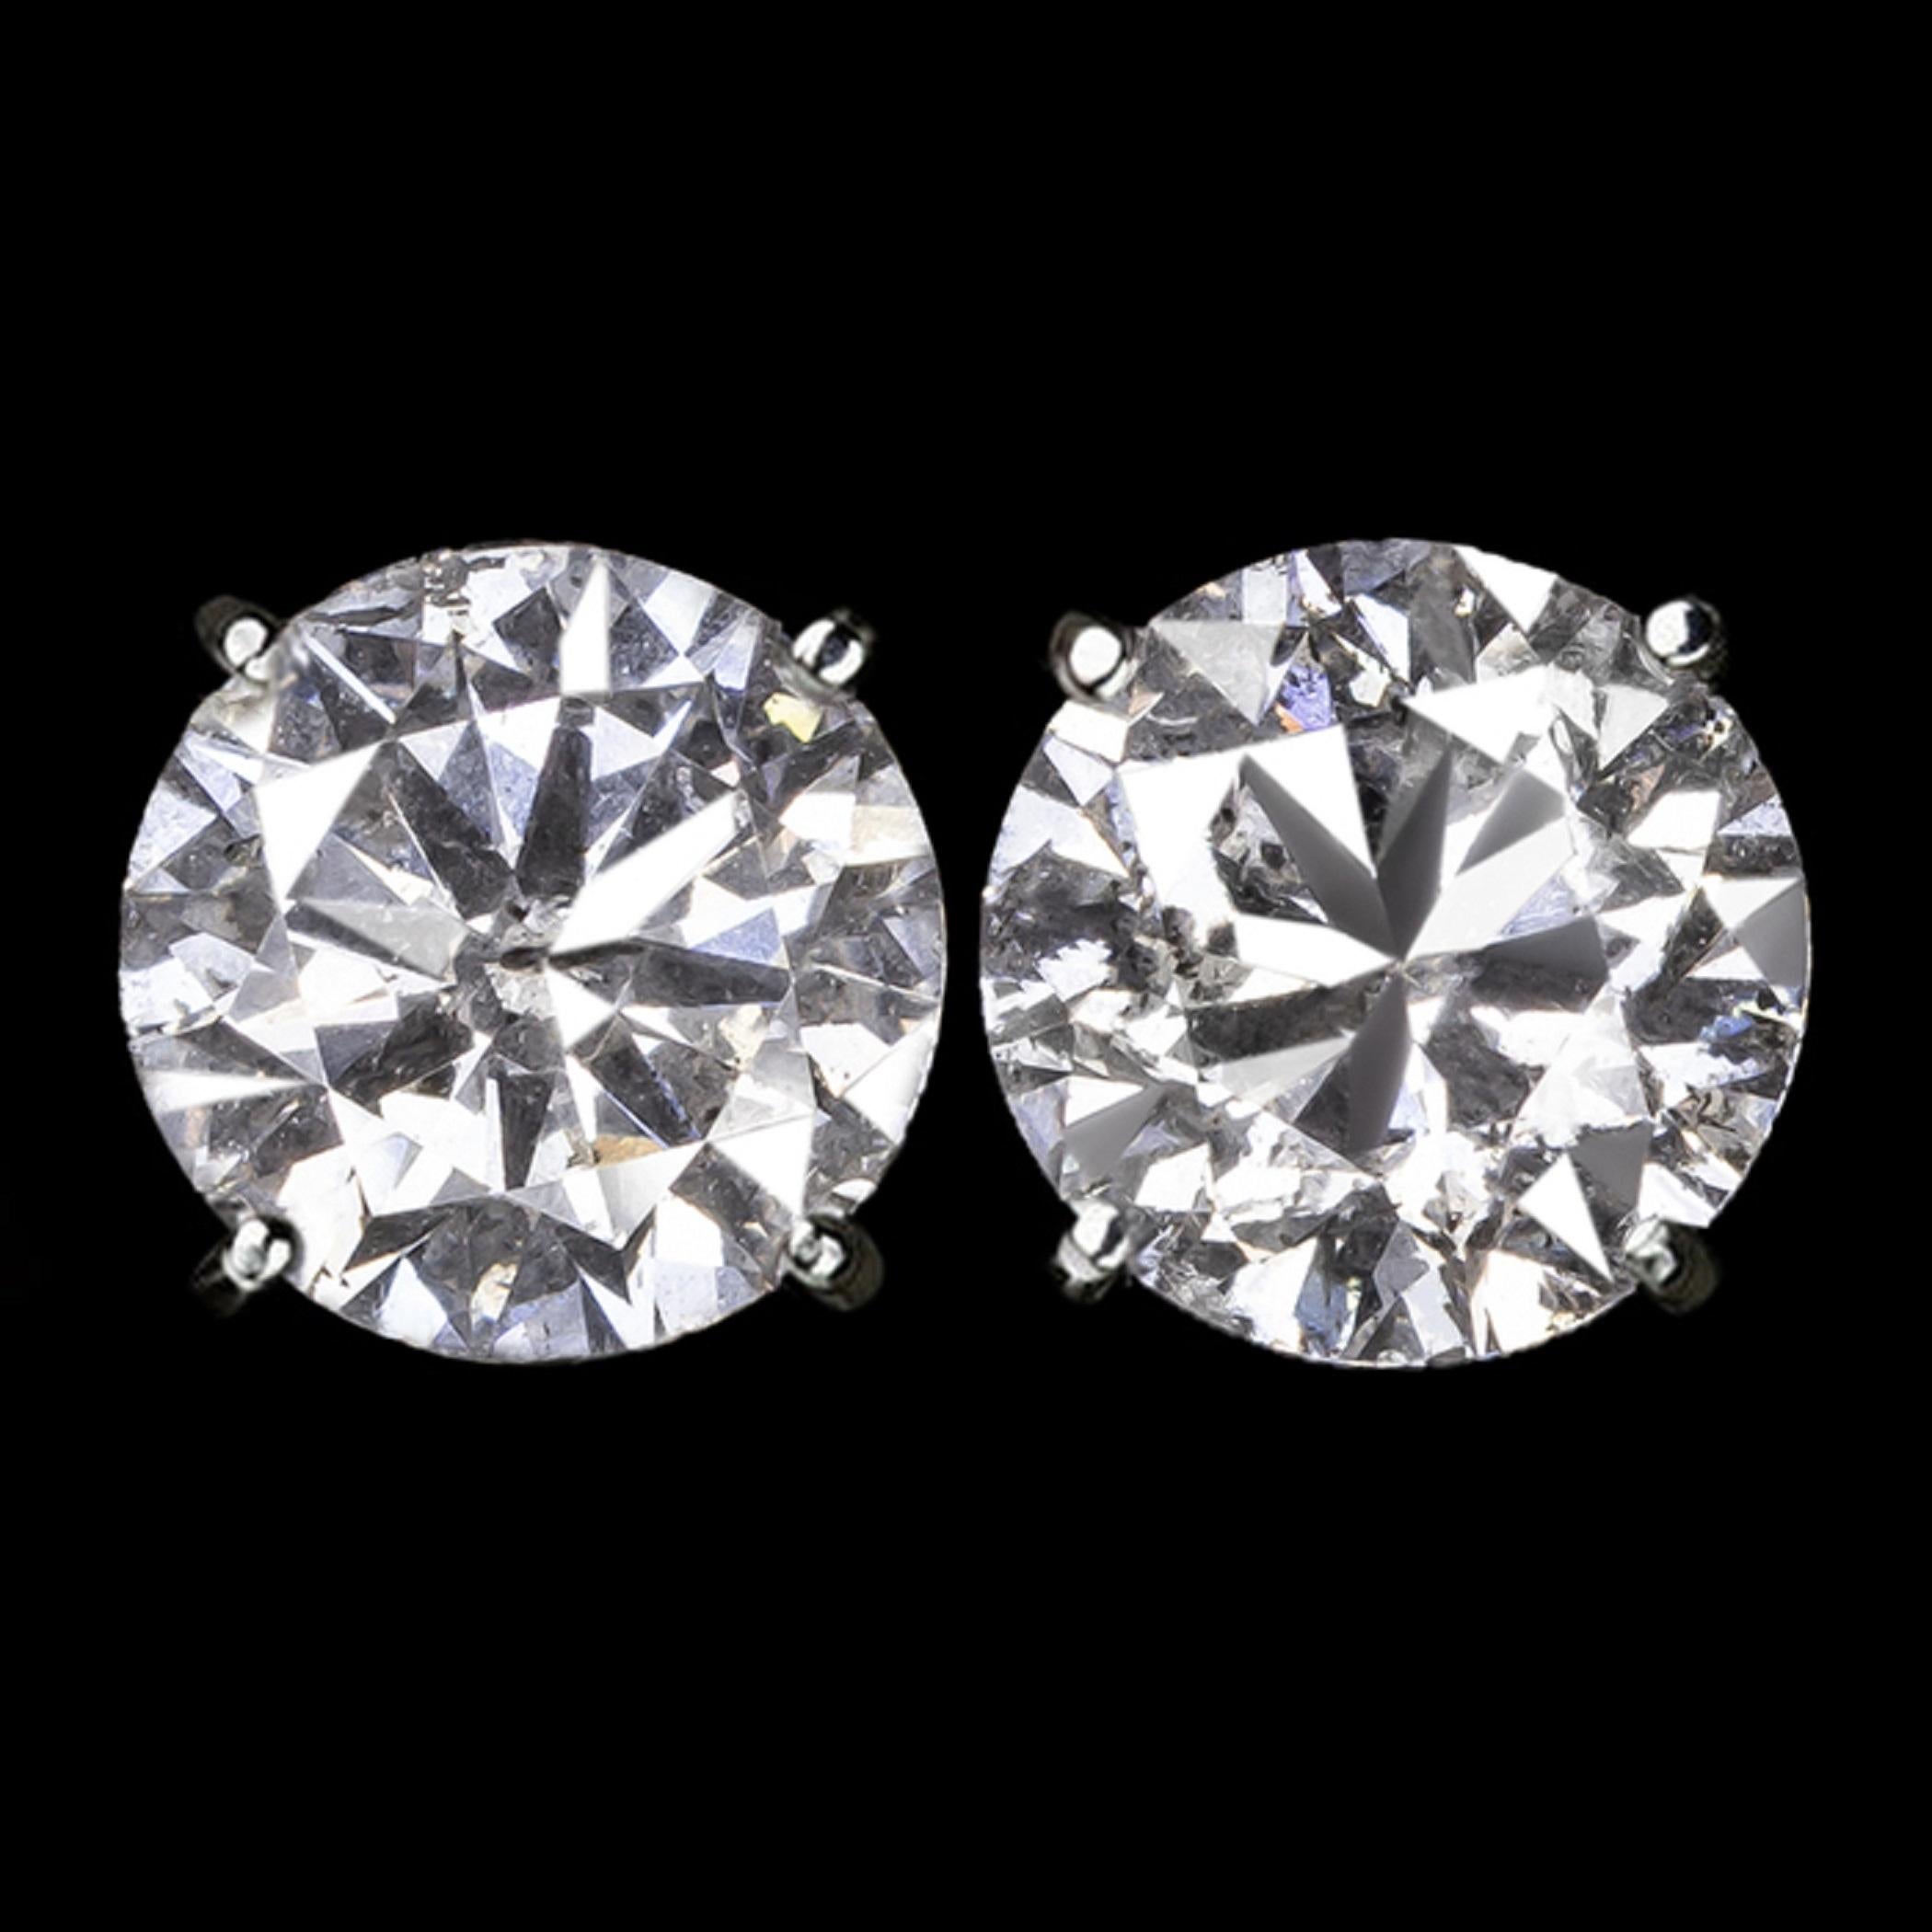 This stunning 4 carat pair of round brilliant cut natural diamonds have bright white color, impressive size, and lovely sparkle! These beauties are offered at a considerable value for their size! They are 100% natural earth mined diamonds and have